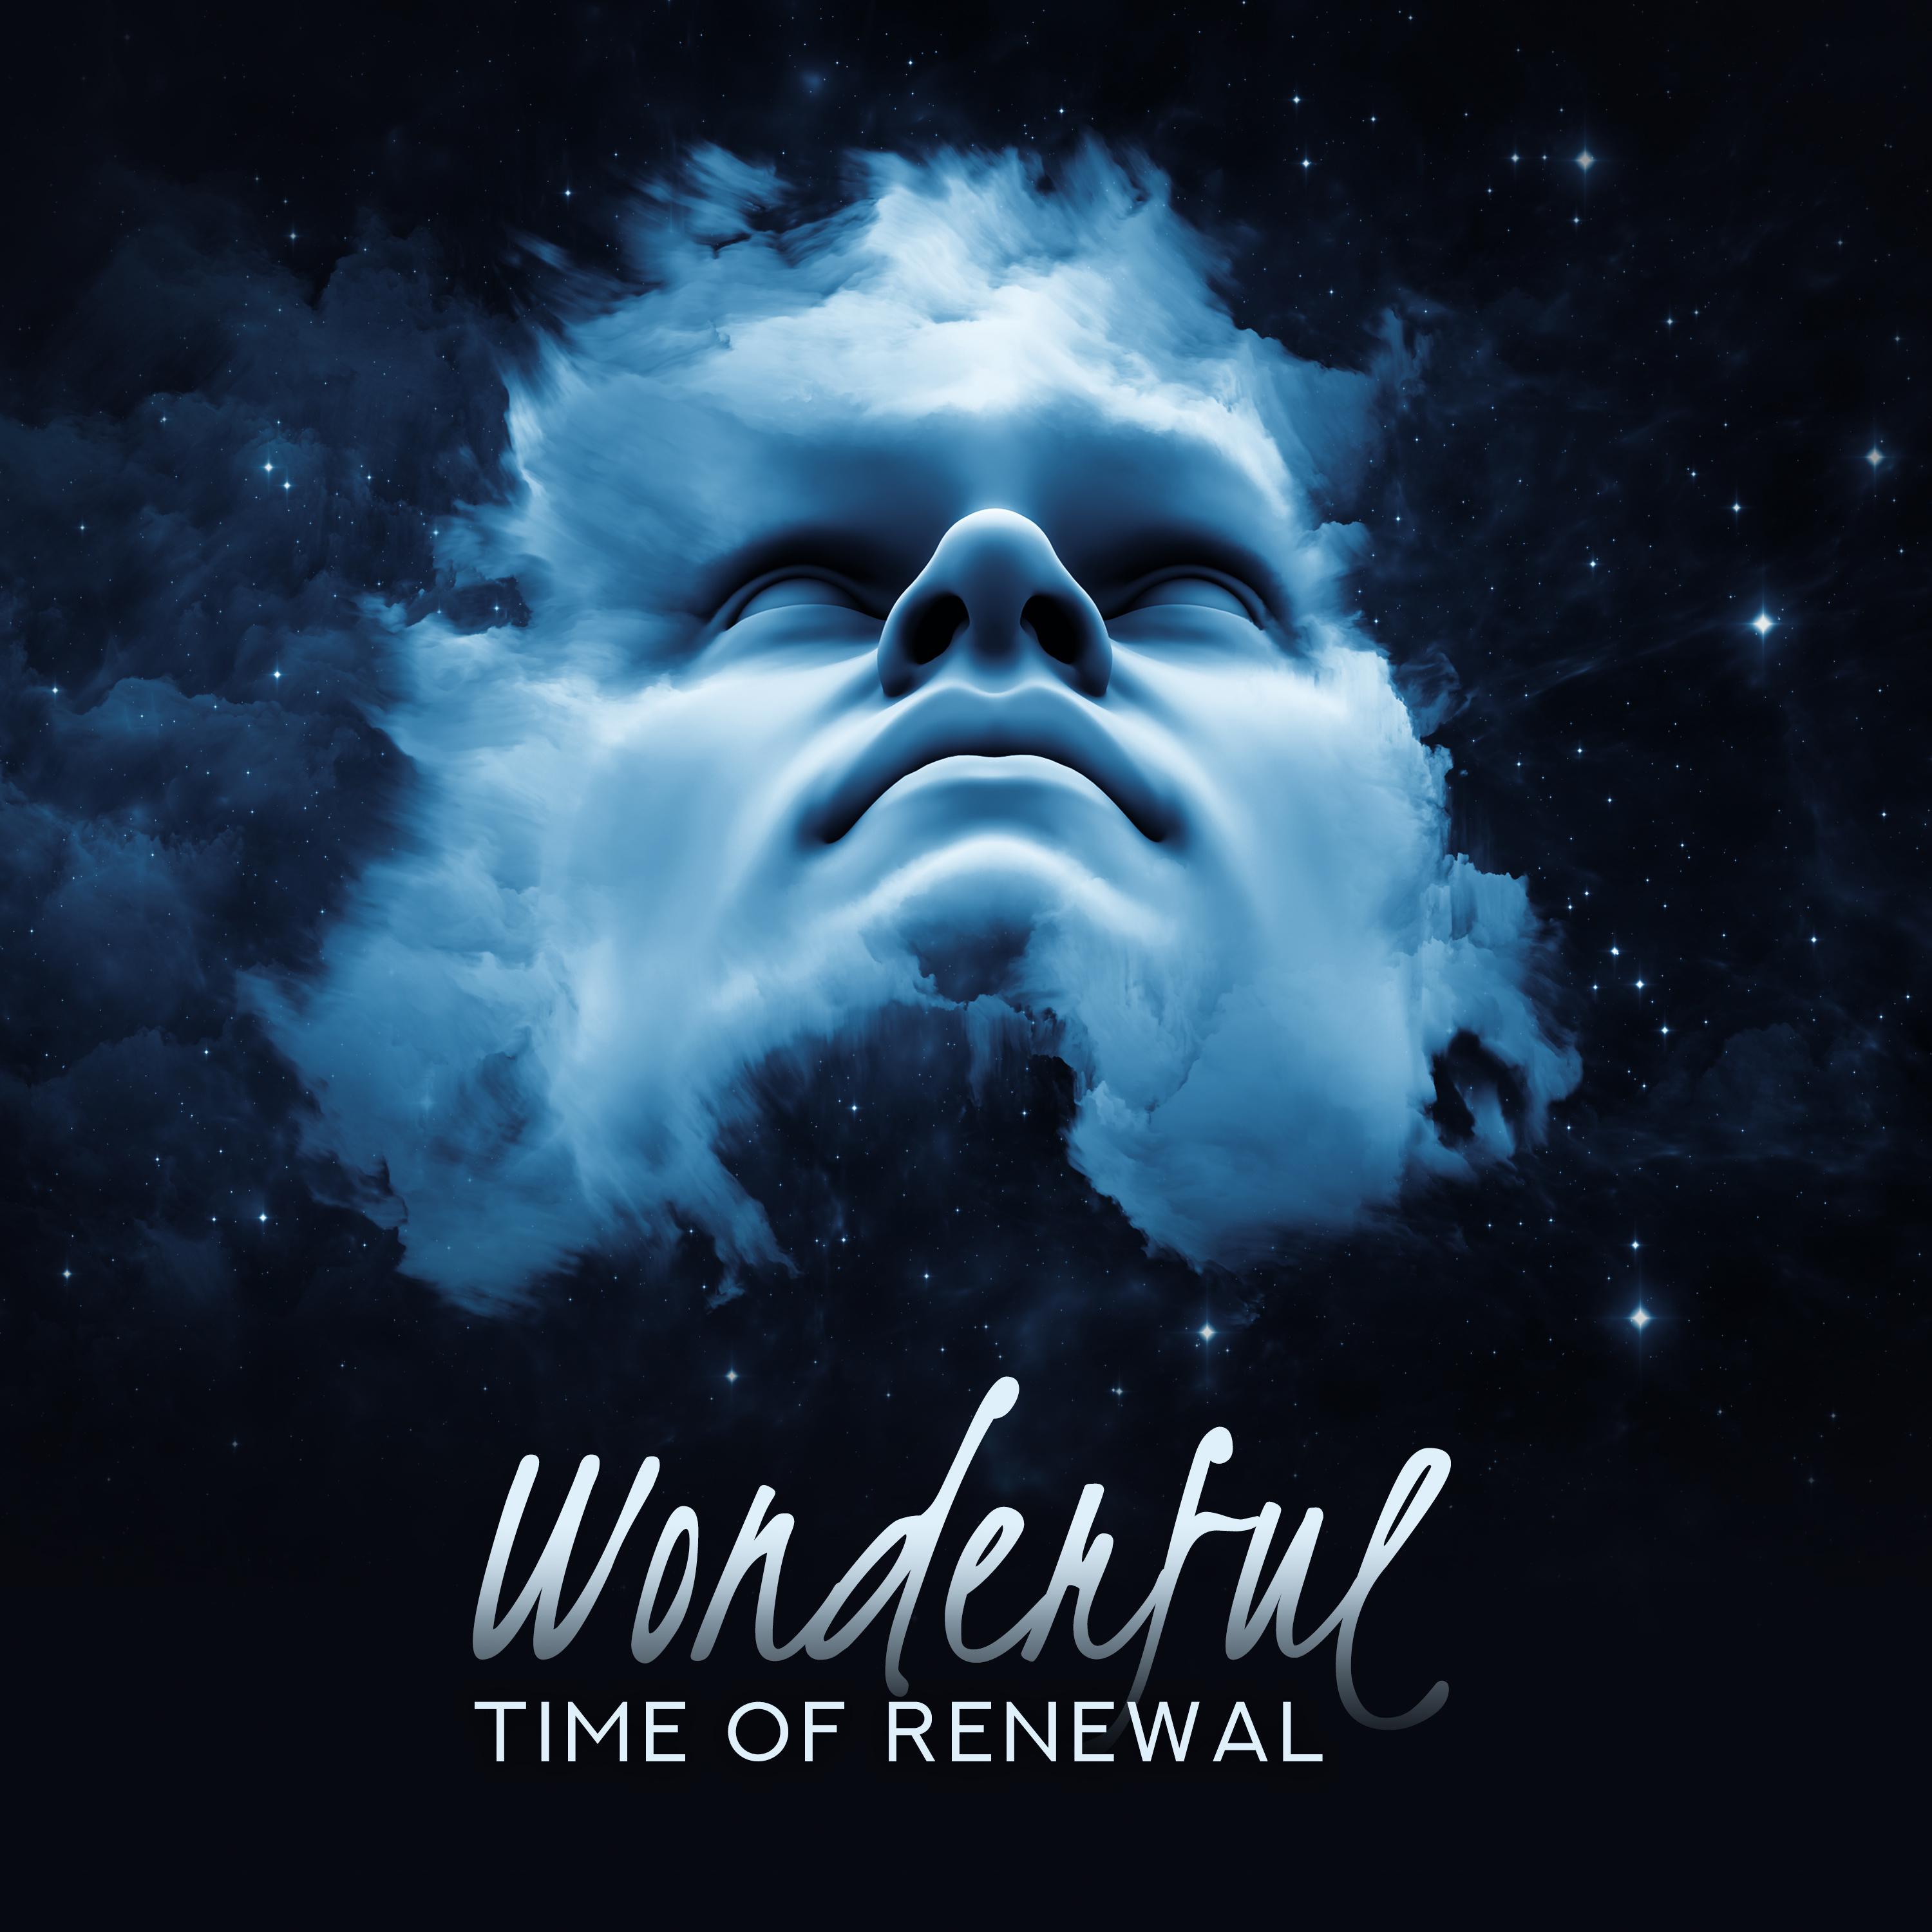 Wonderful Time of Renewal(Healing Sounds for Mind, Body and Spirit)